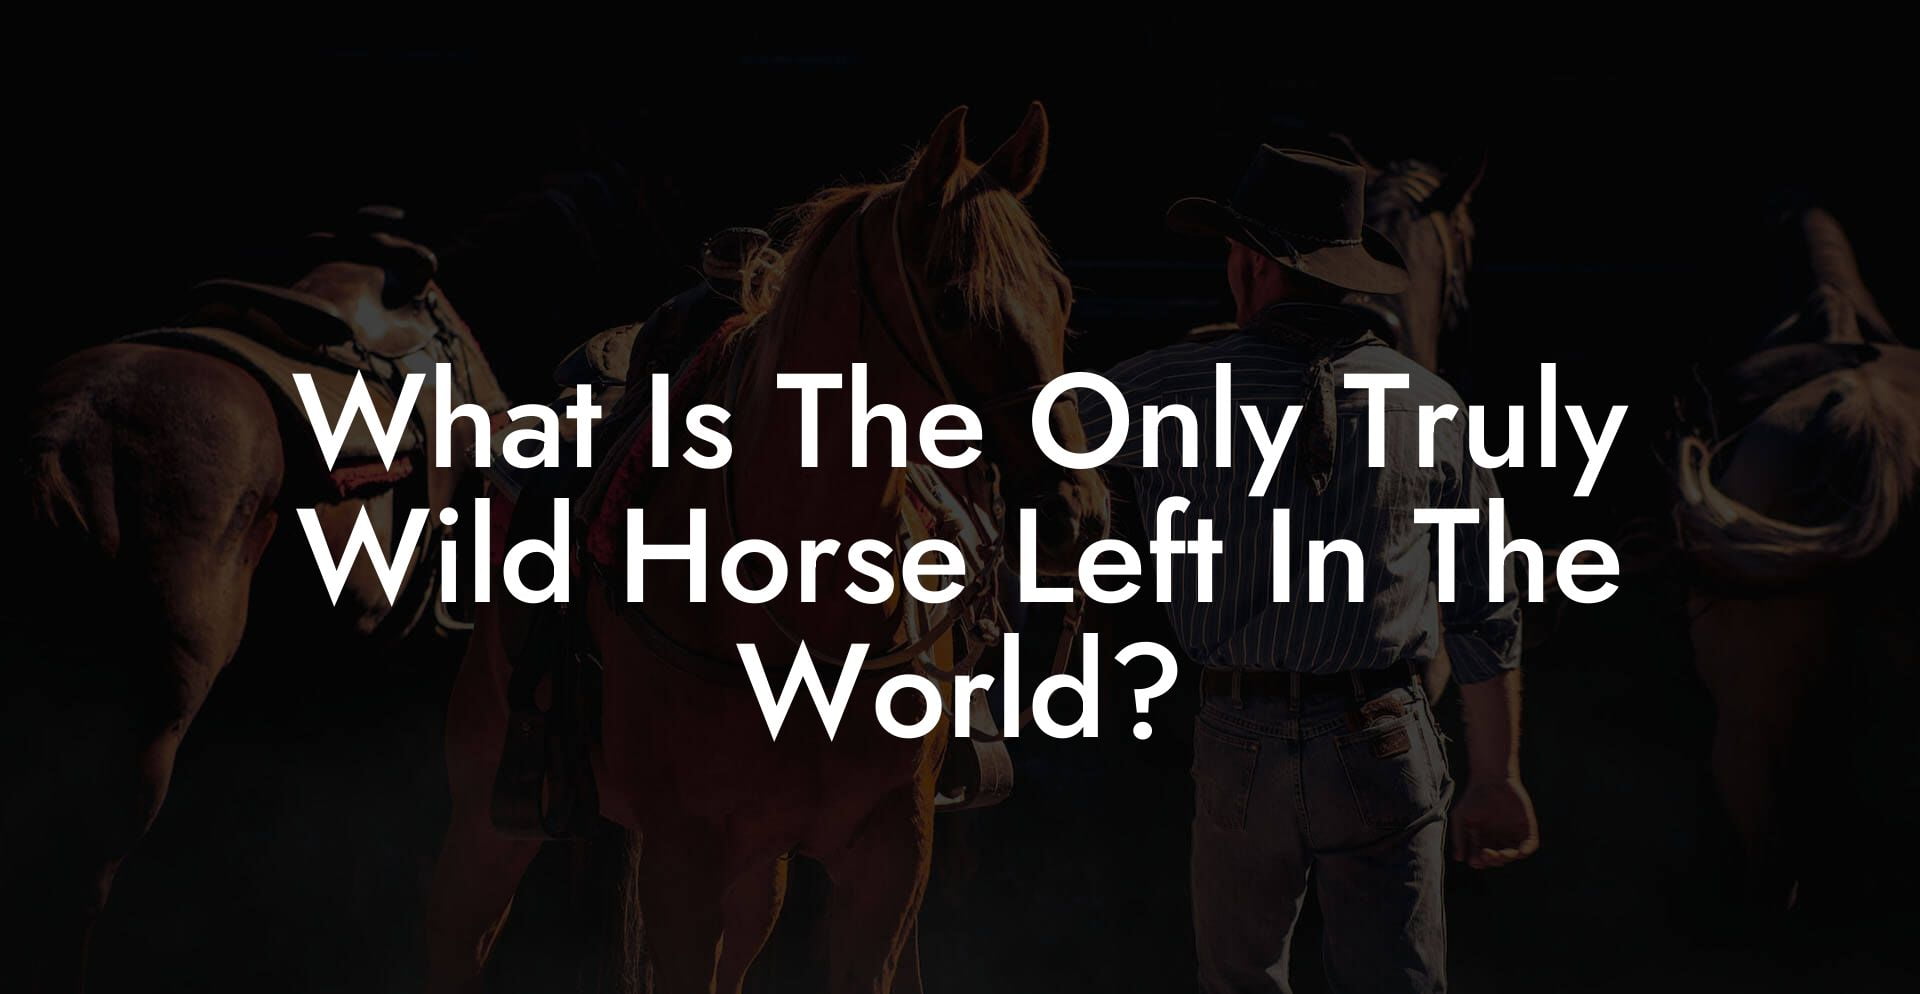 What Is The Only Truly Wild Horse Left In The World?